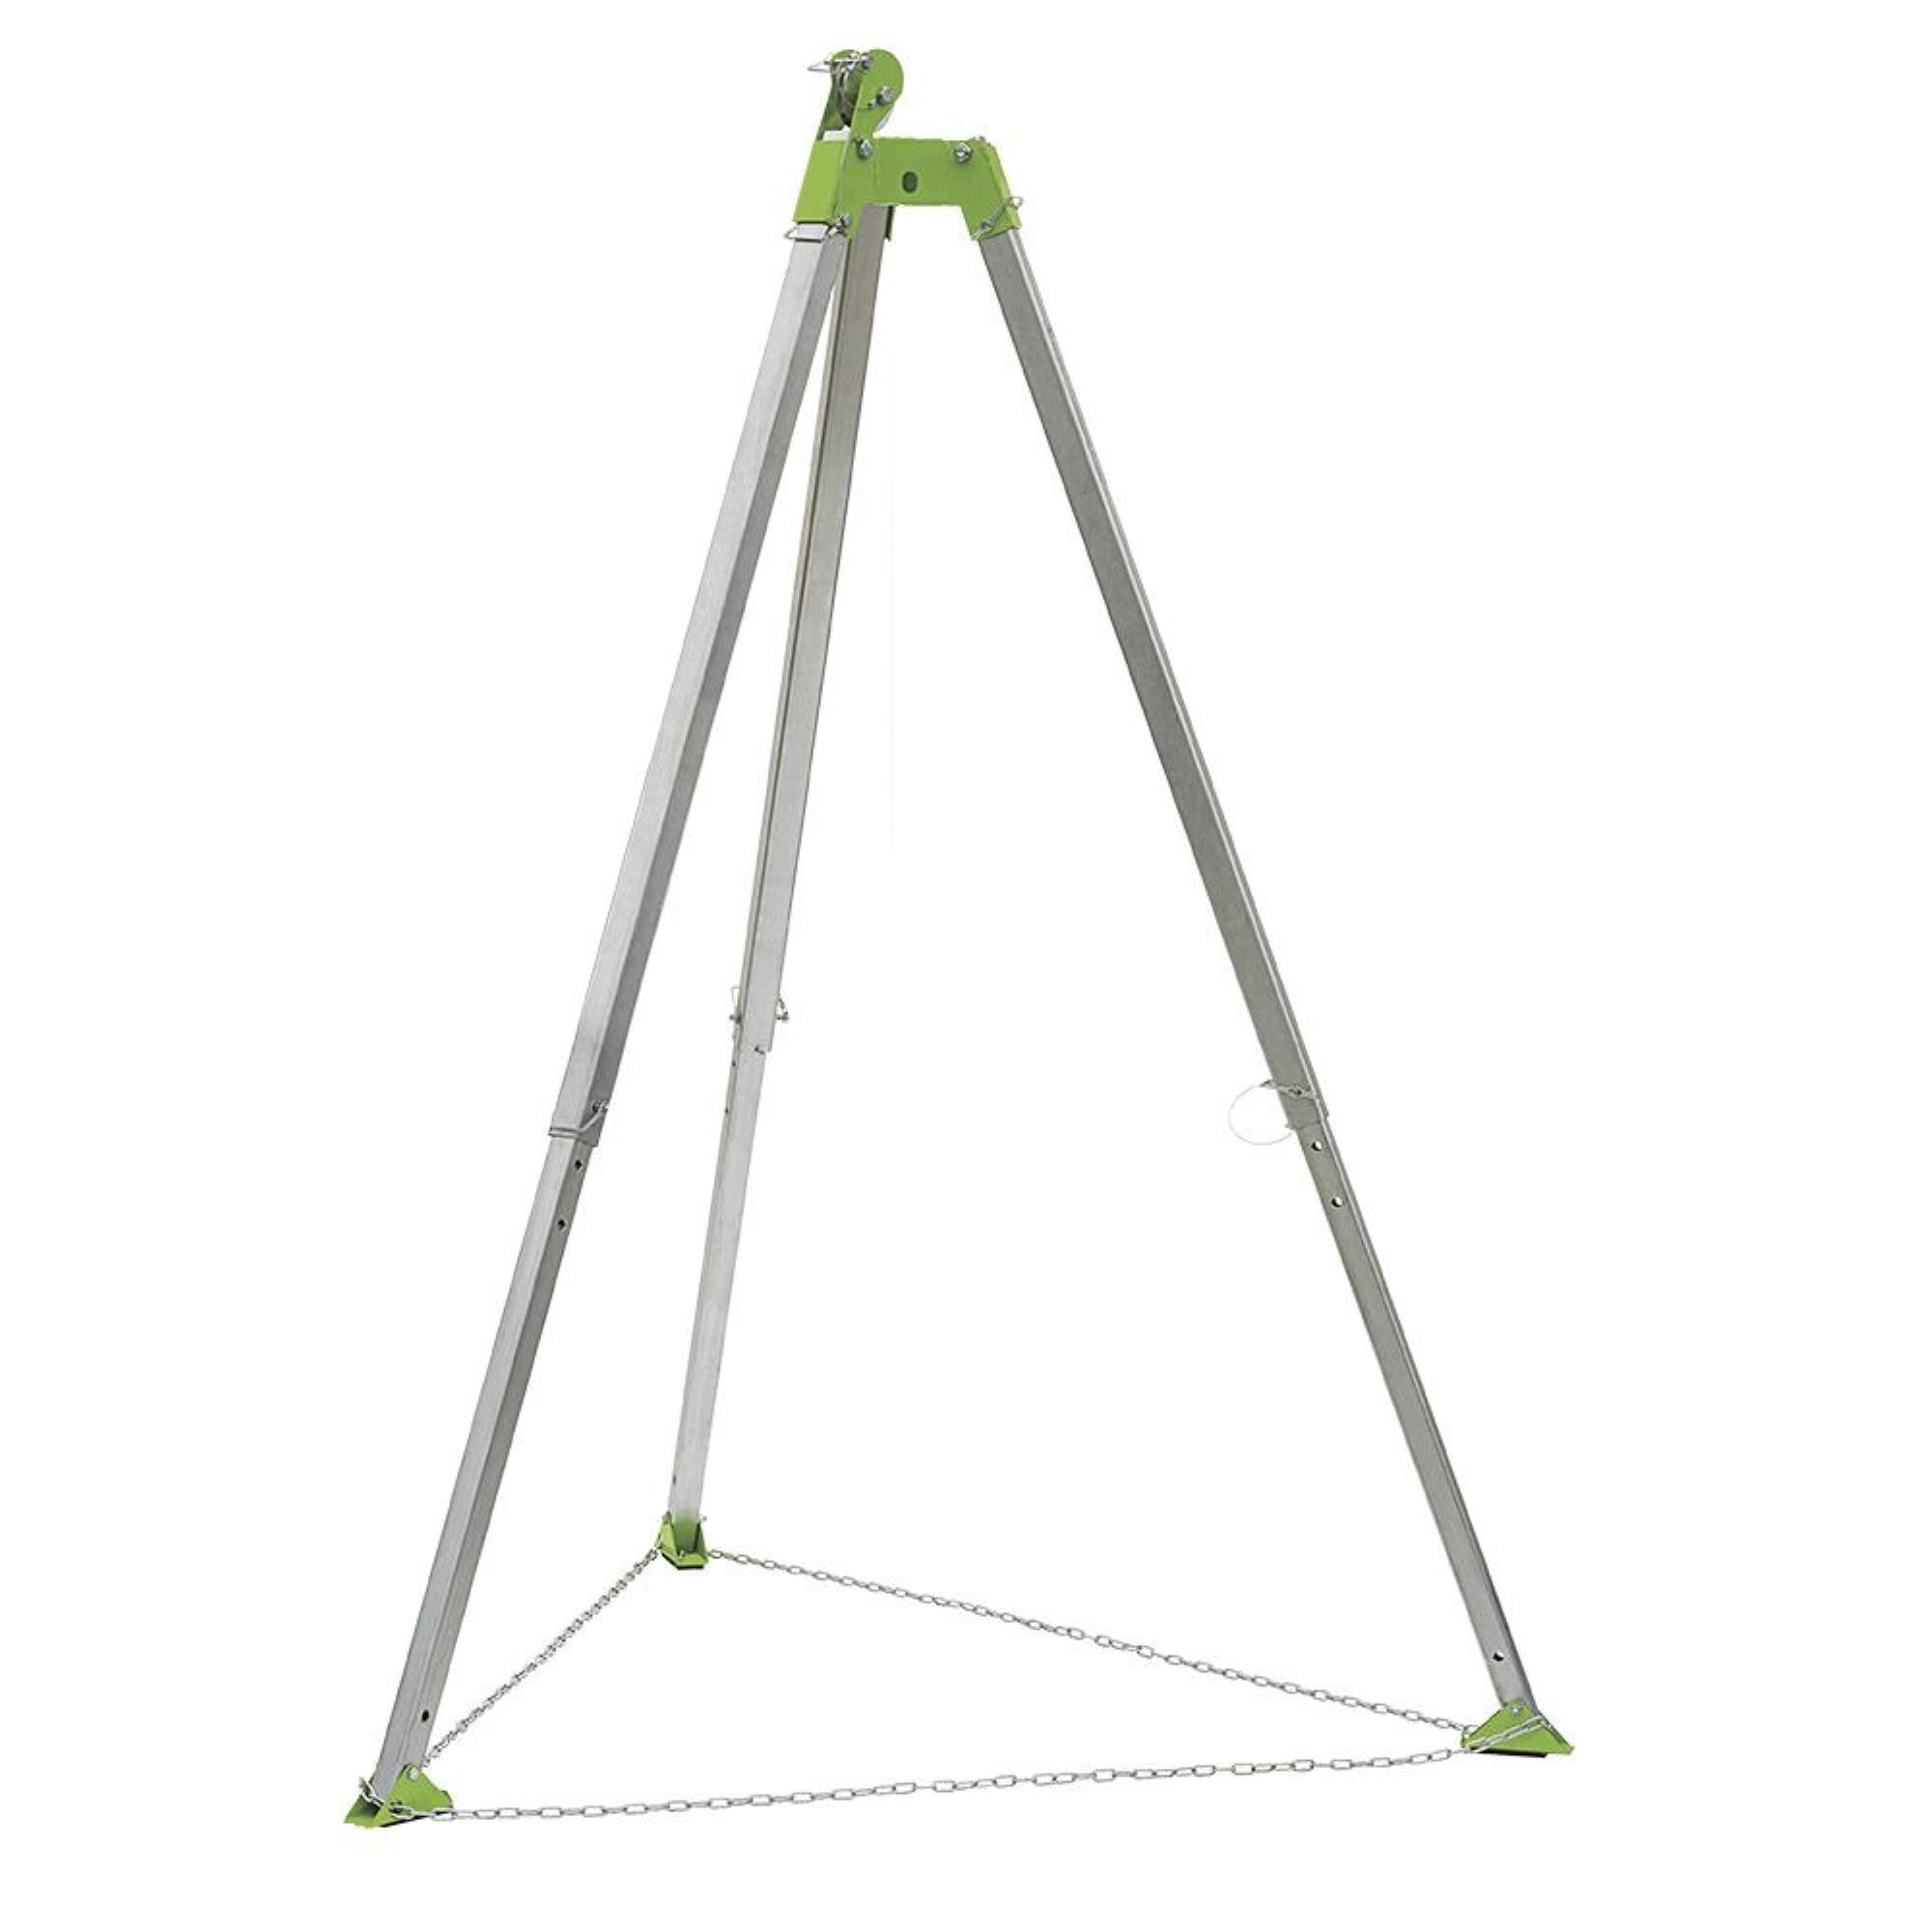 Peak Works, 7ft. (2 m) Tripod with Chain and Pulley, Length 7 ft, Model V85011